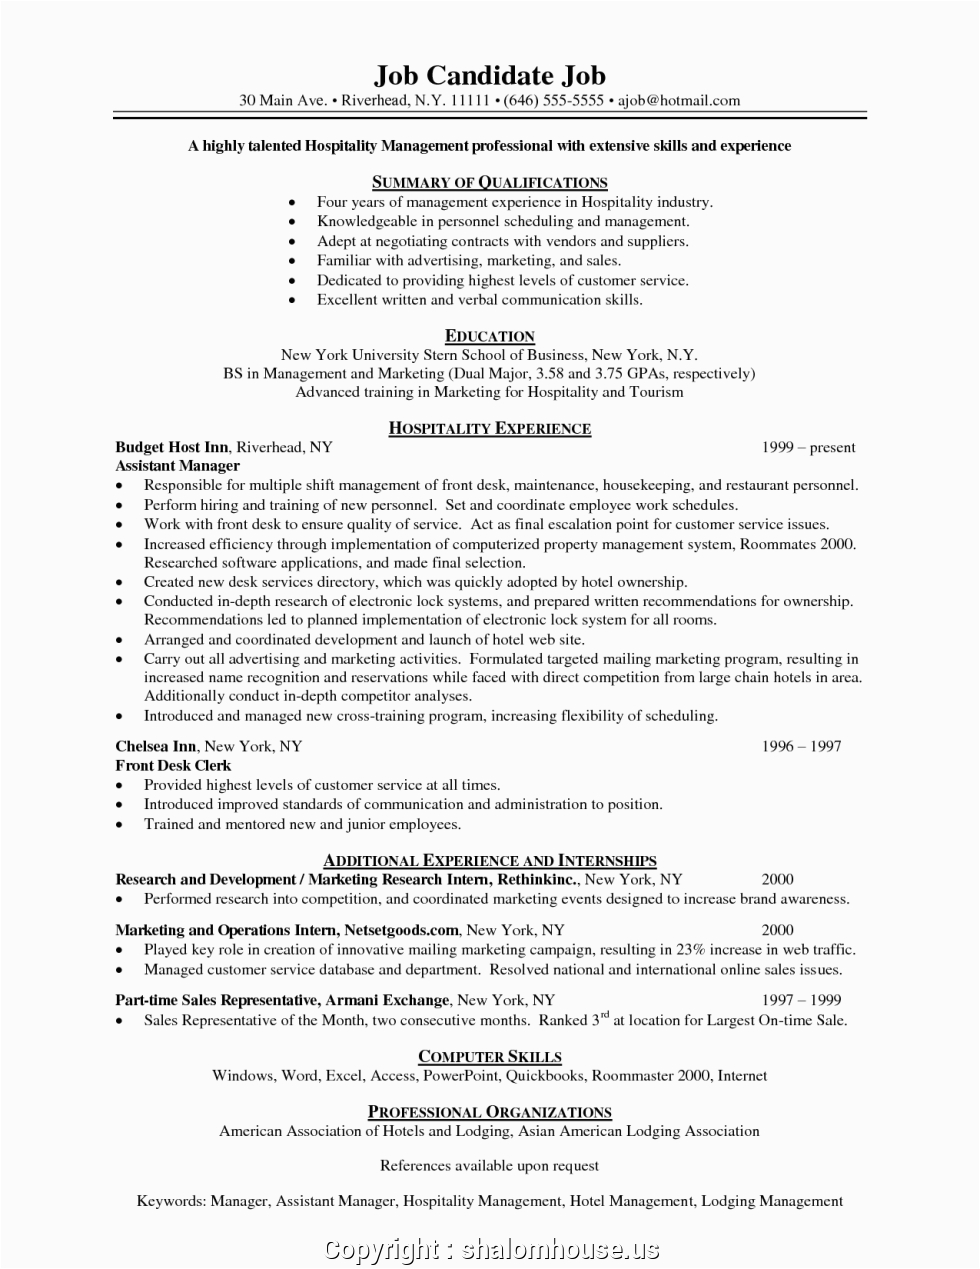 Sample Resume for Hospitality and tourism Management Creative Sample Resume for Hospitality and tourism